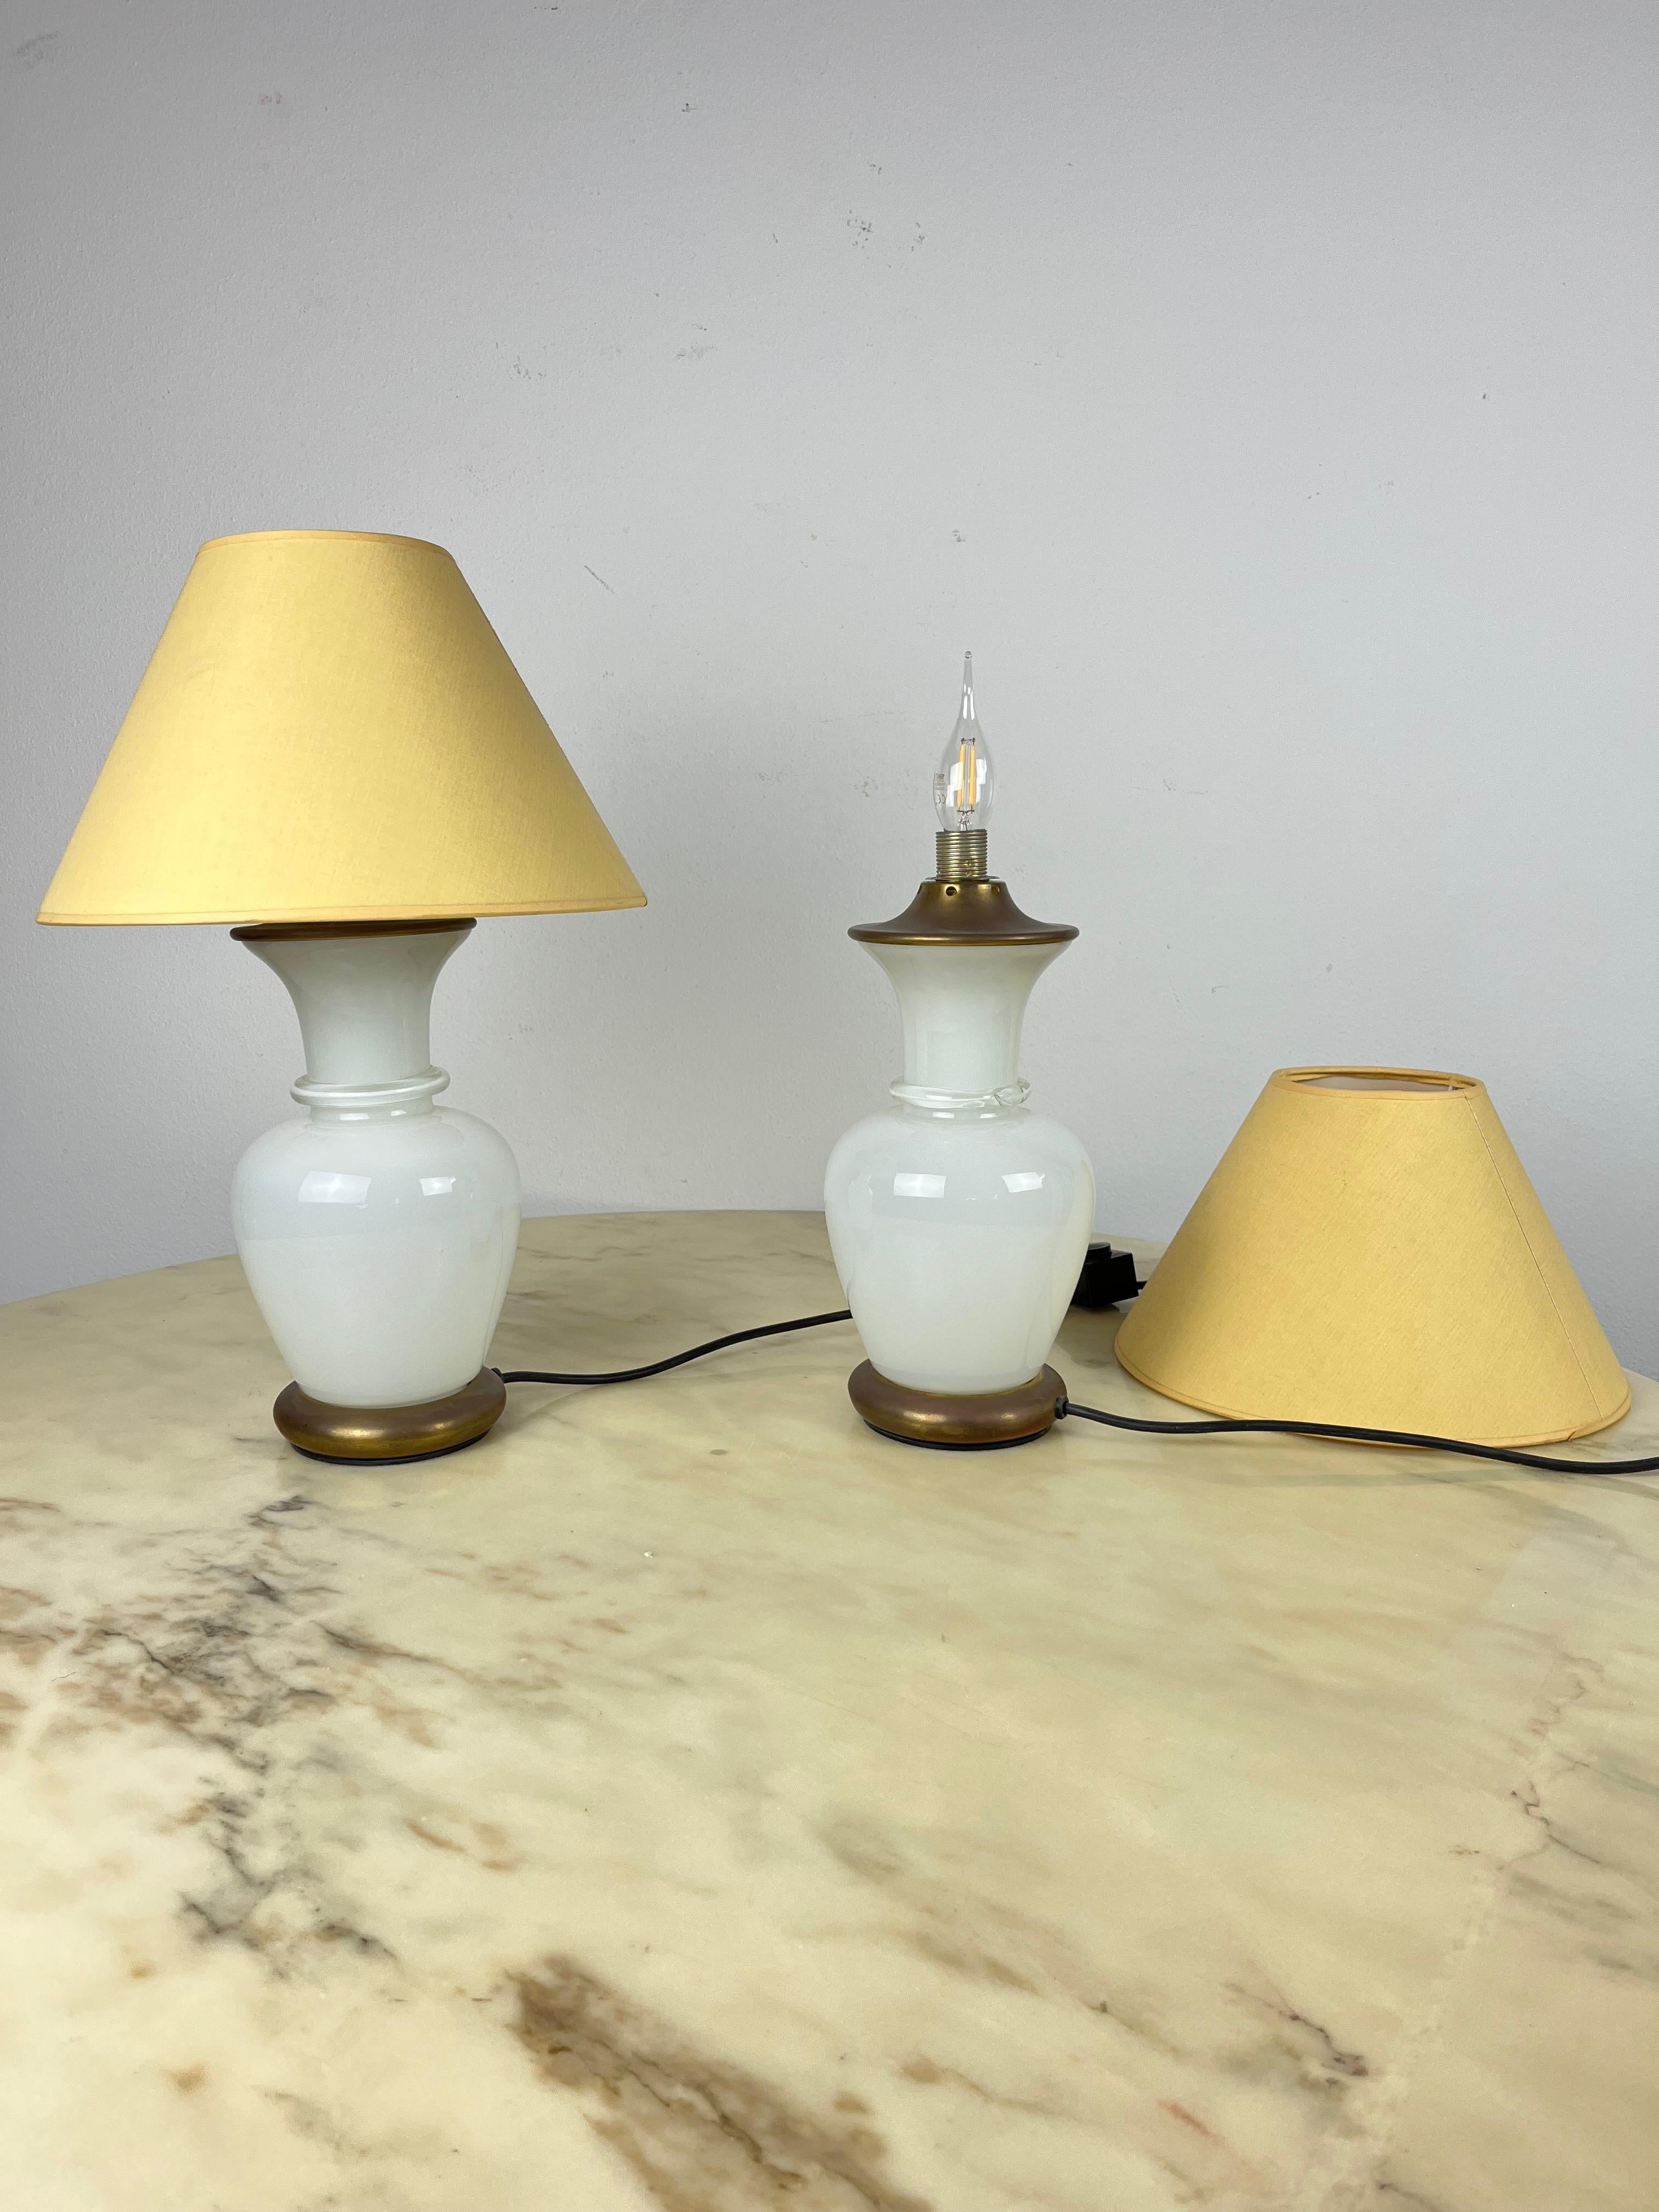 Set of 2 Murano Glass and Brass Table Lamps, F. Fabbian, Italy, 1970s For Sale 3